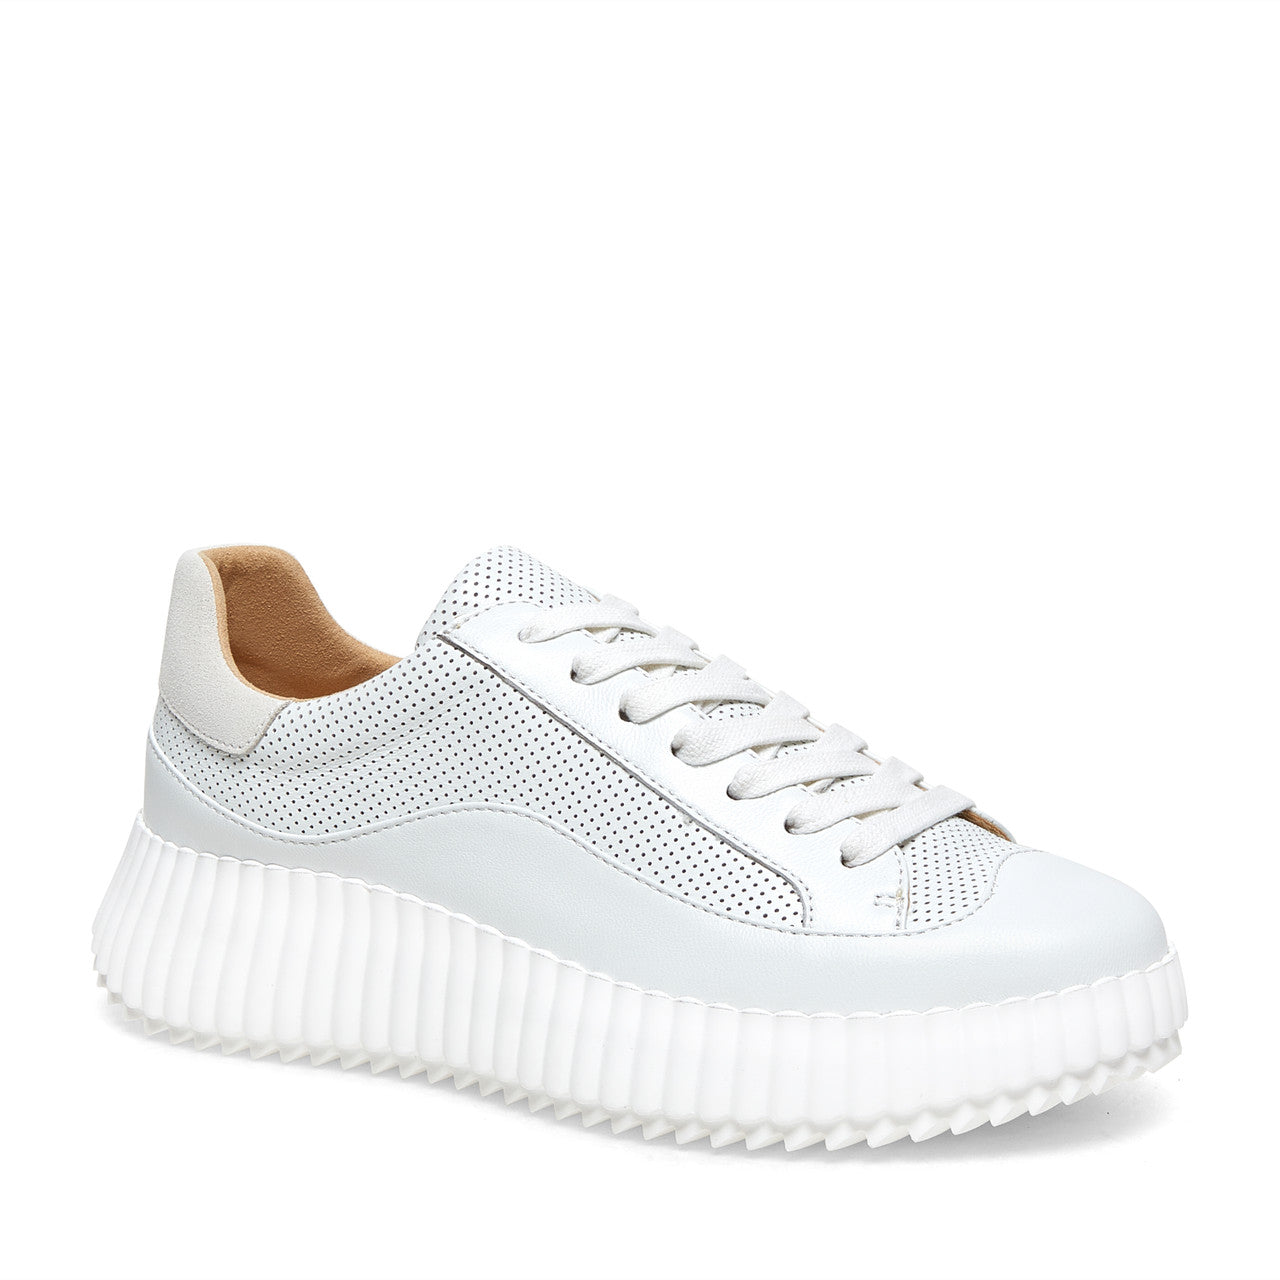 The Perforated Lace Sneaker in White